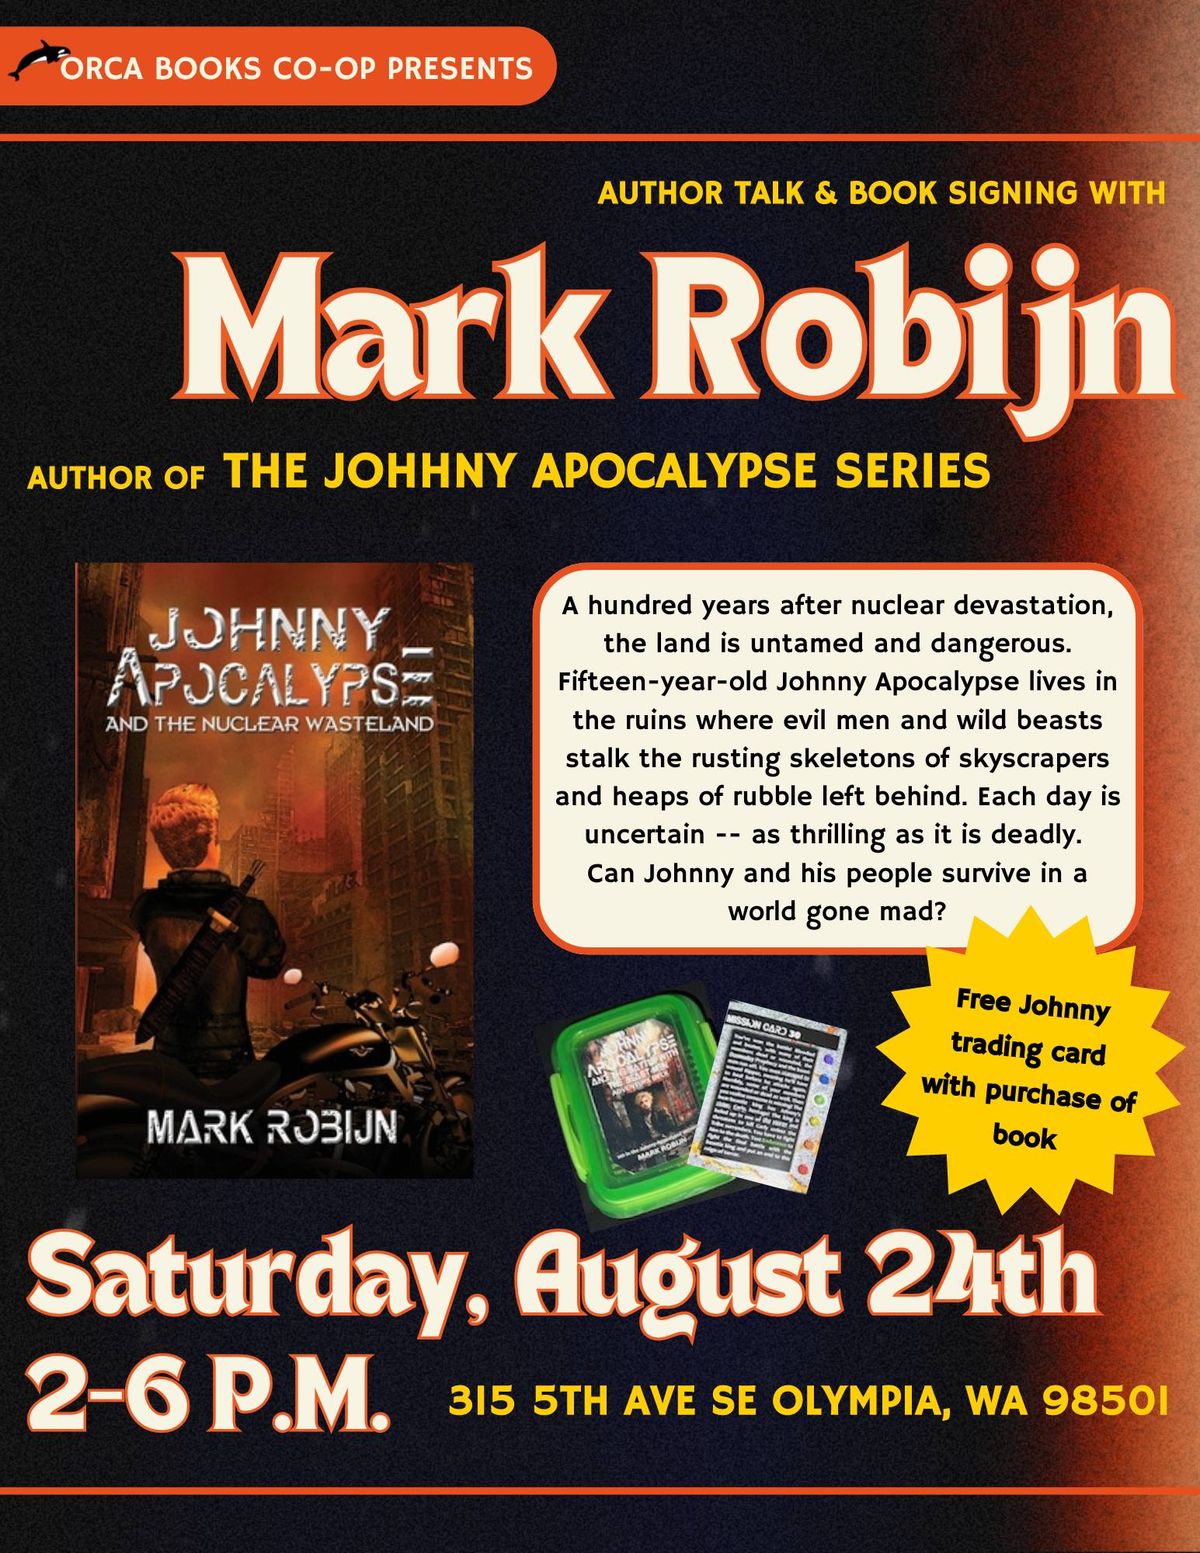 Author Talk and Signing with Mark Robijn